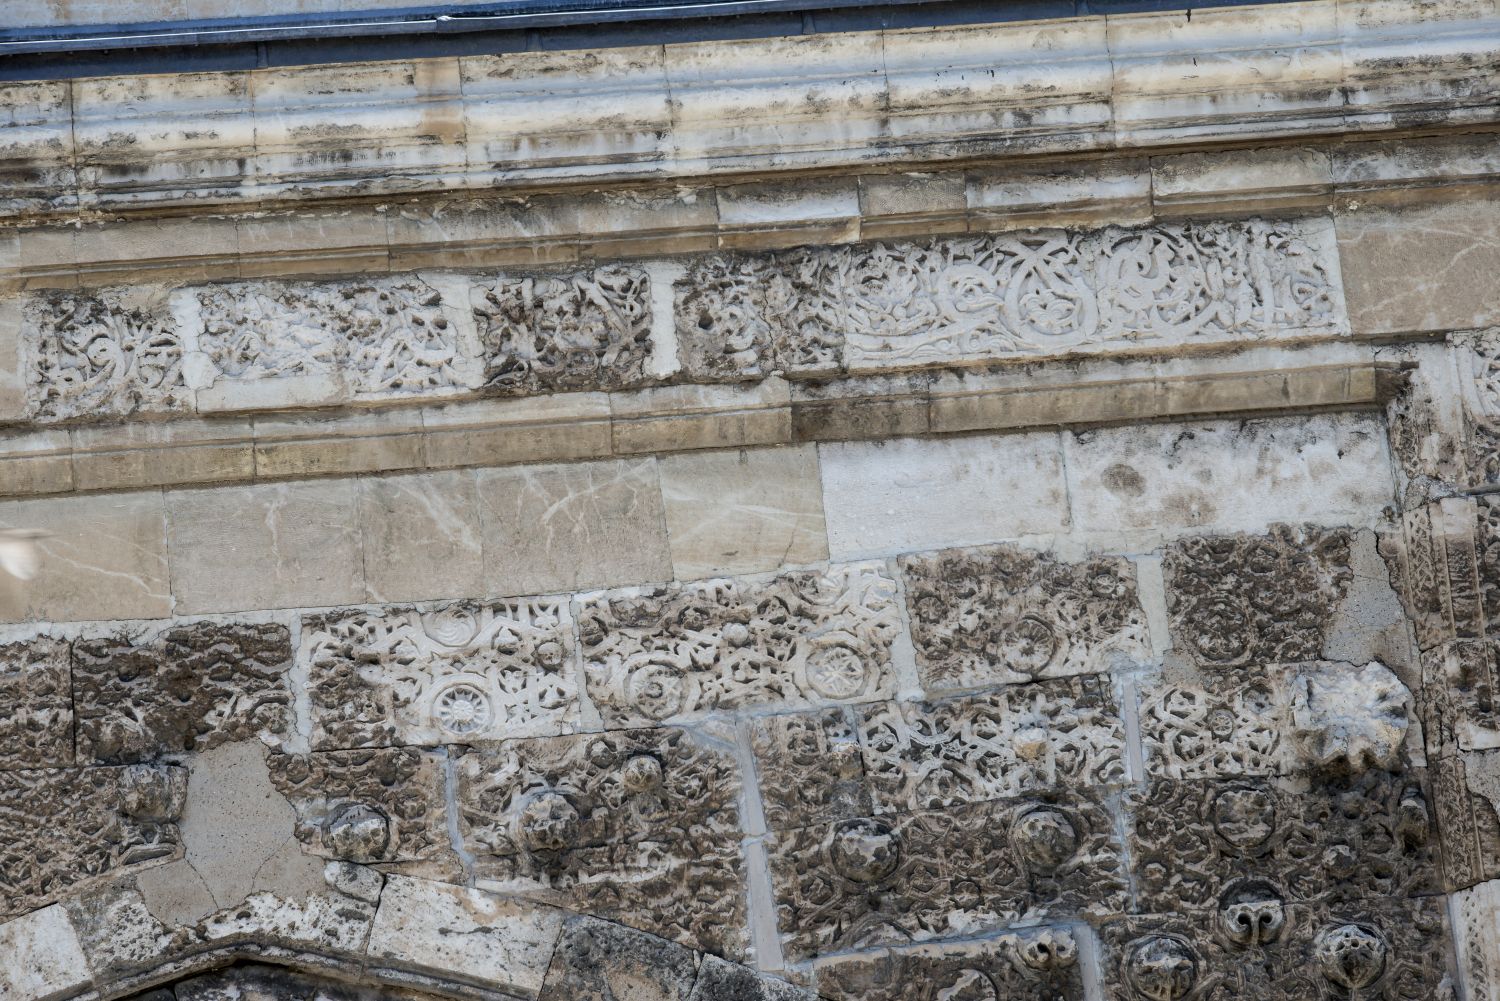 East iwan: detail view of upper portion of facade showing vegetal ornament within geometric frames carved on surface.